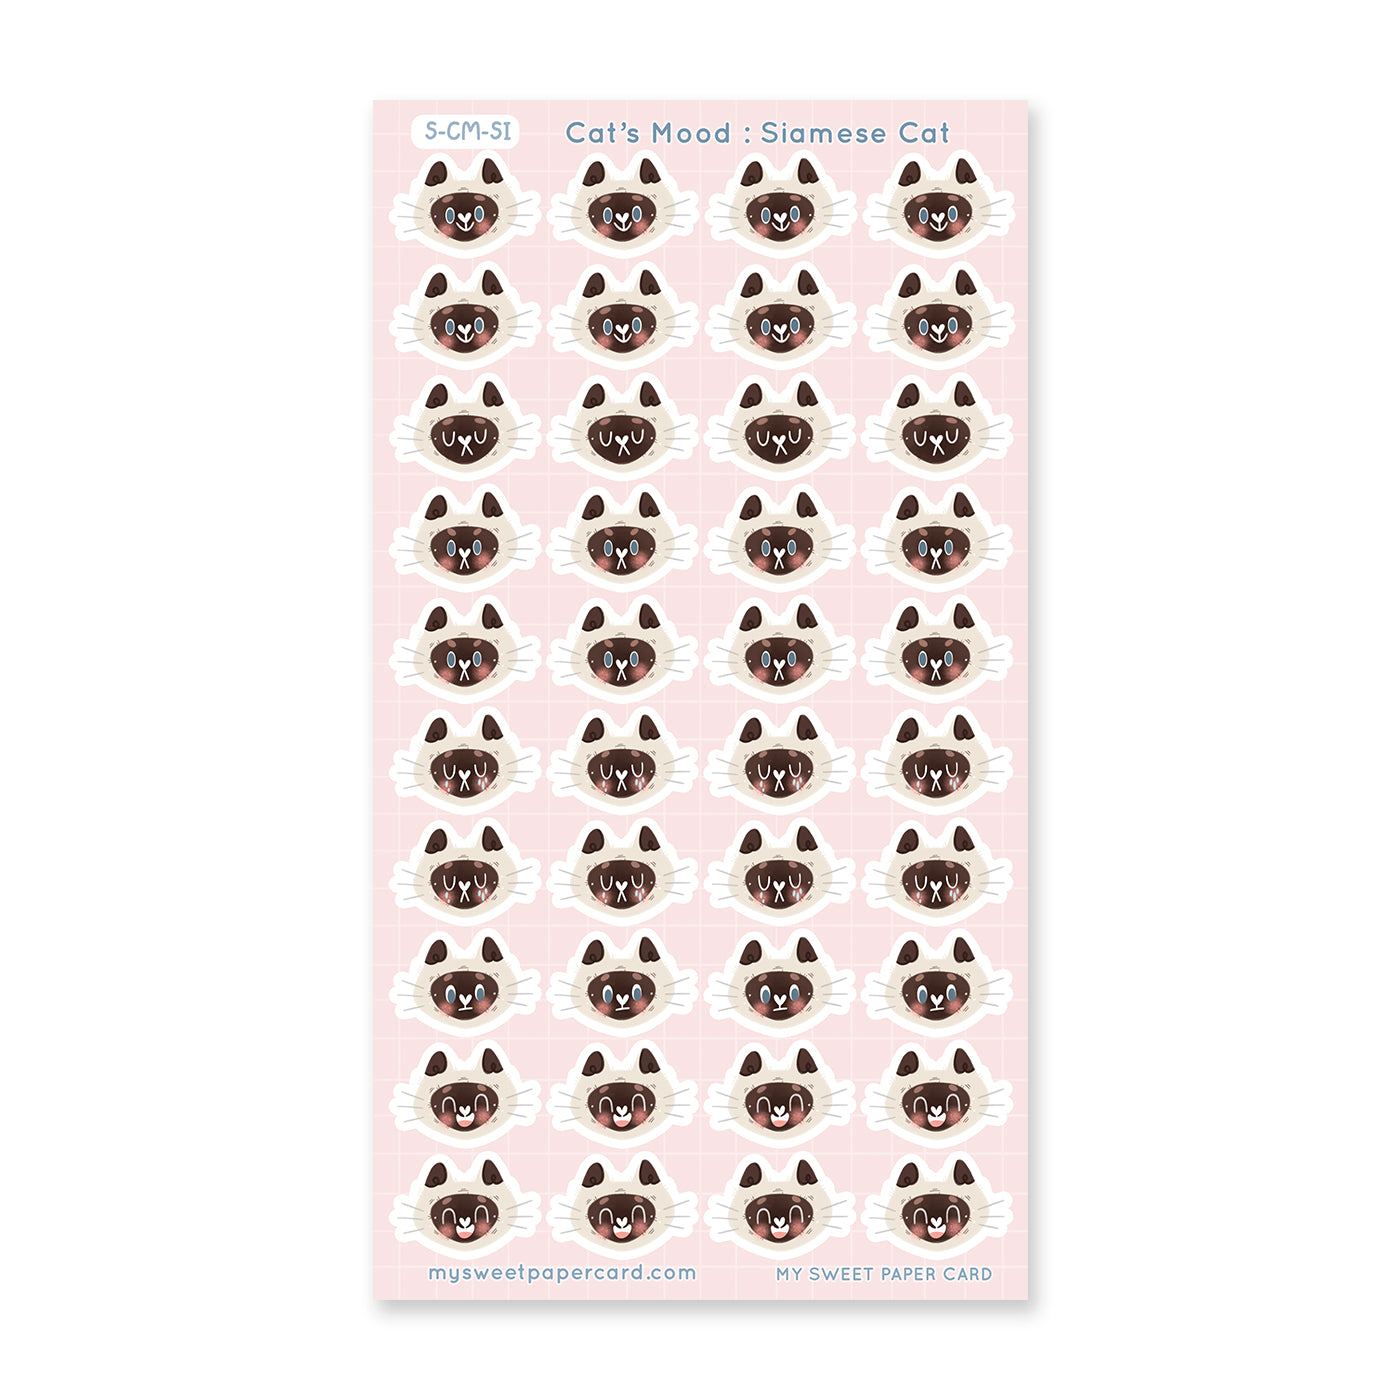 siamese cat stickers sheet with different moods